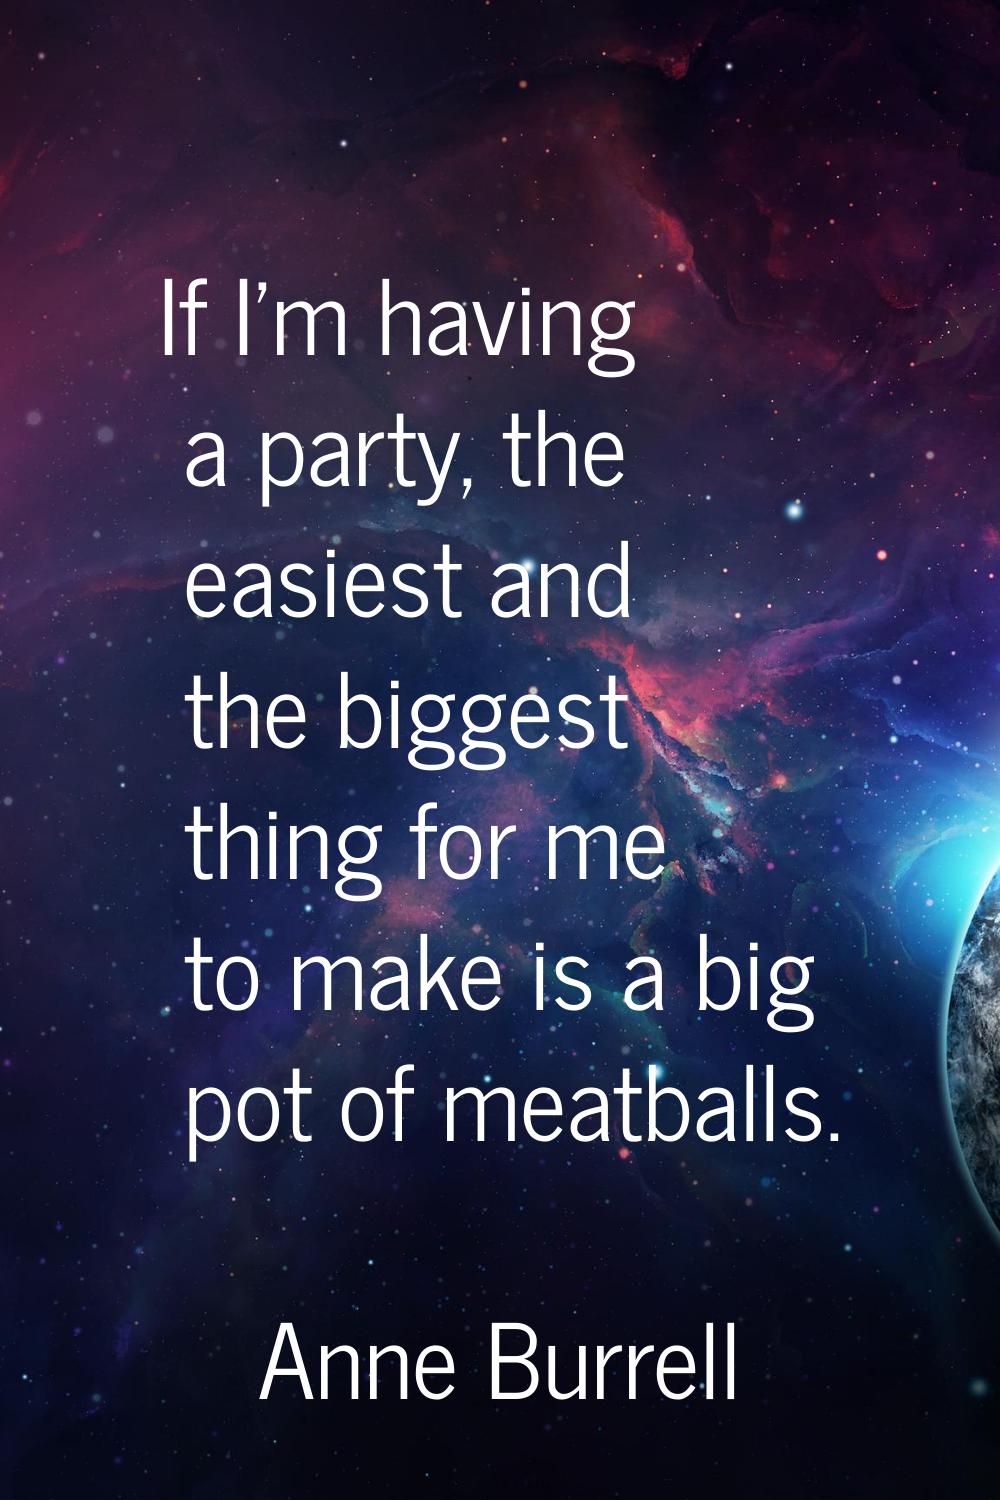 If I'm having a party, the easiest and the biggest thing for me to make is a big pot of meatballs.